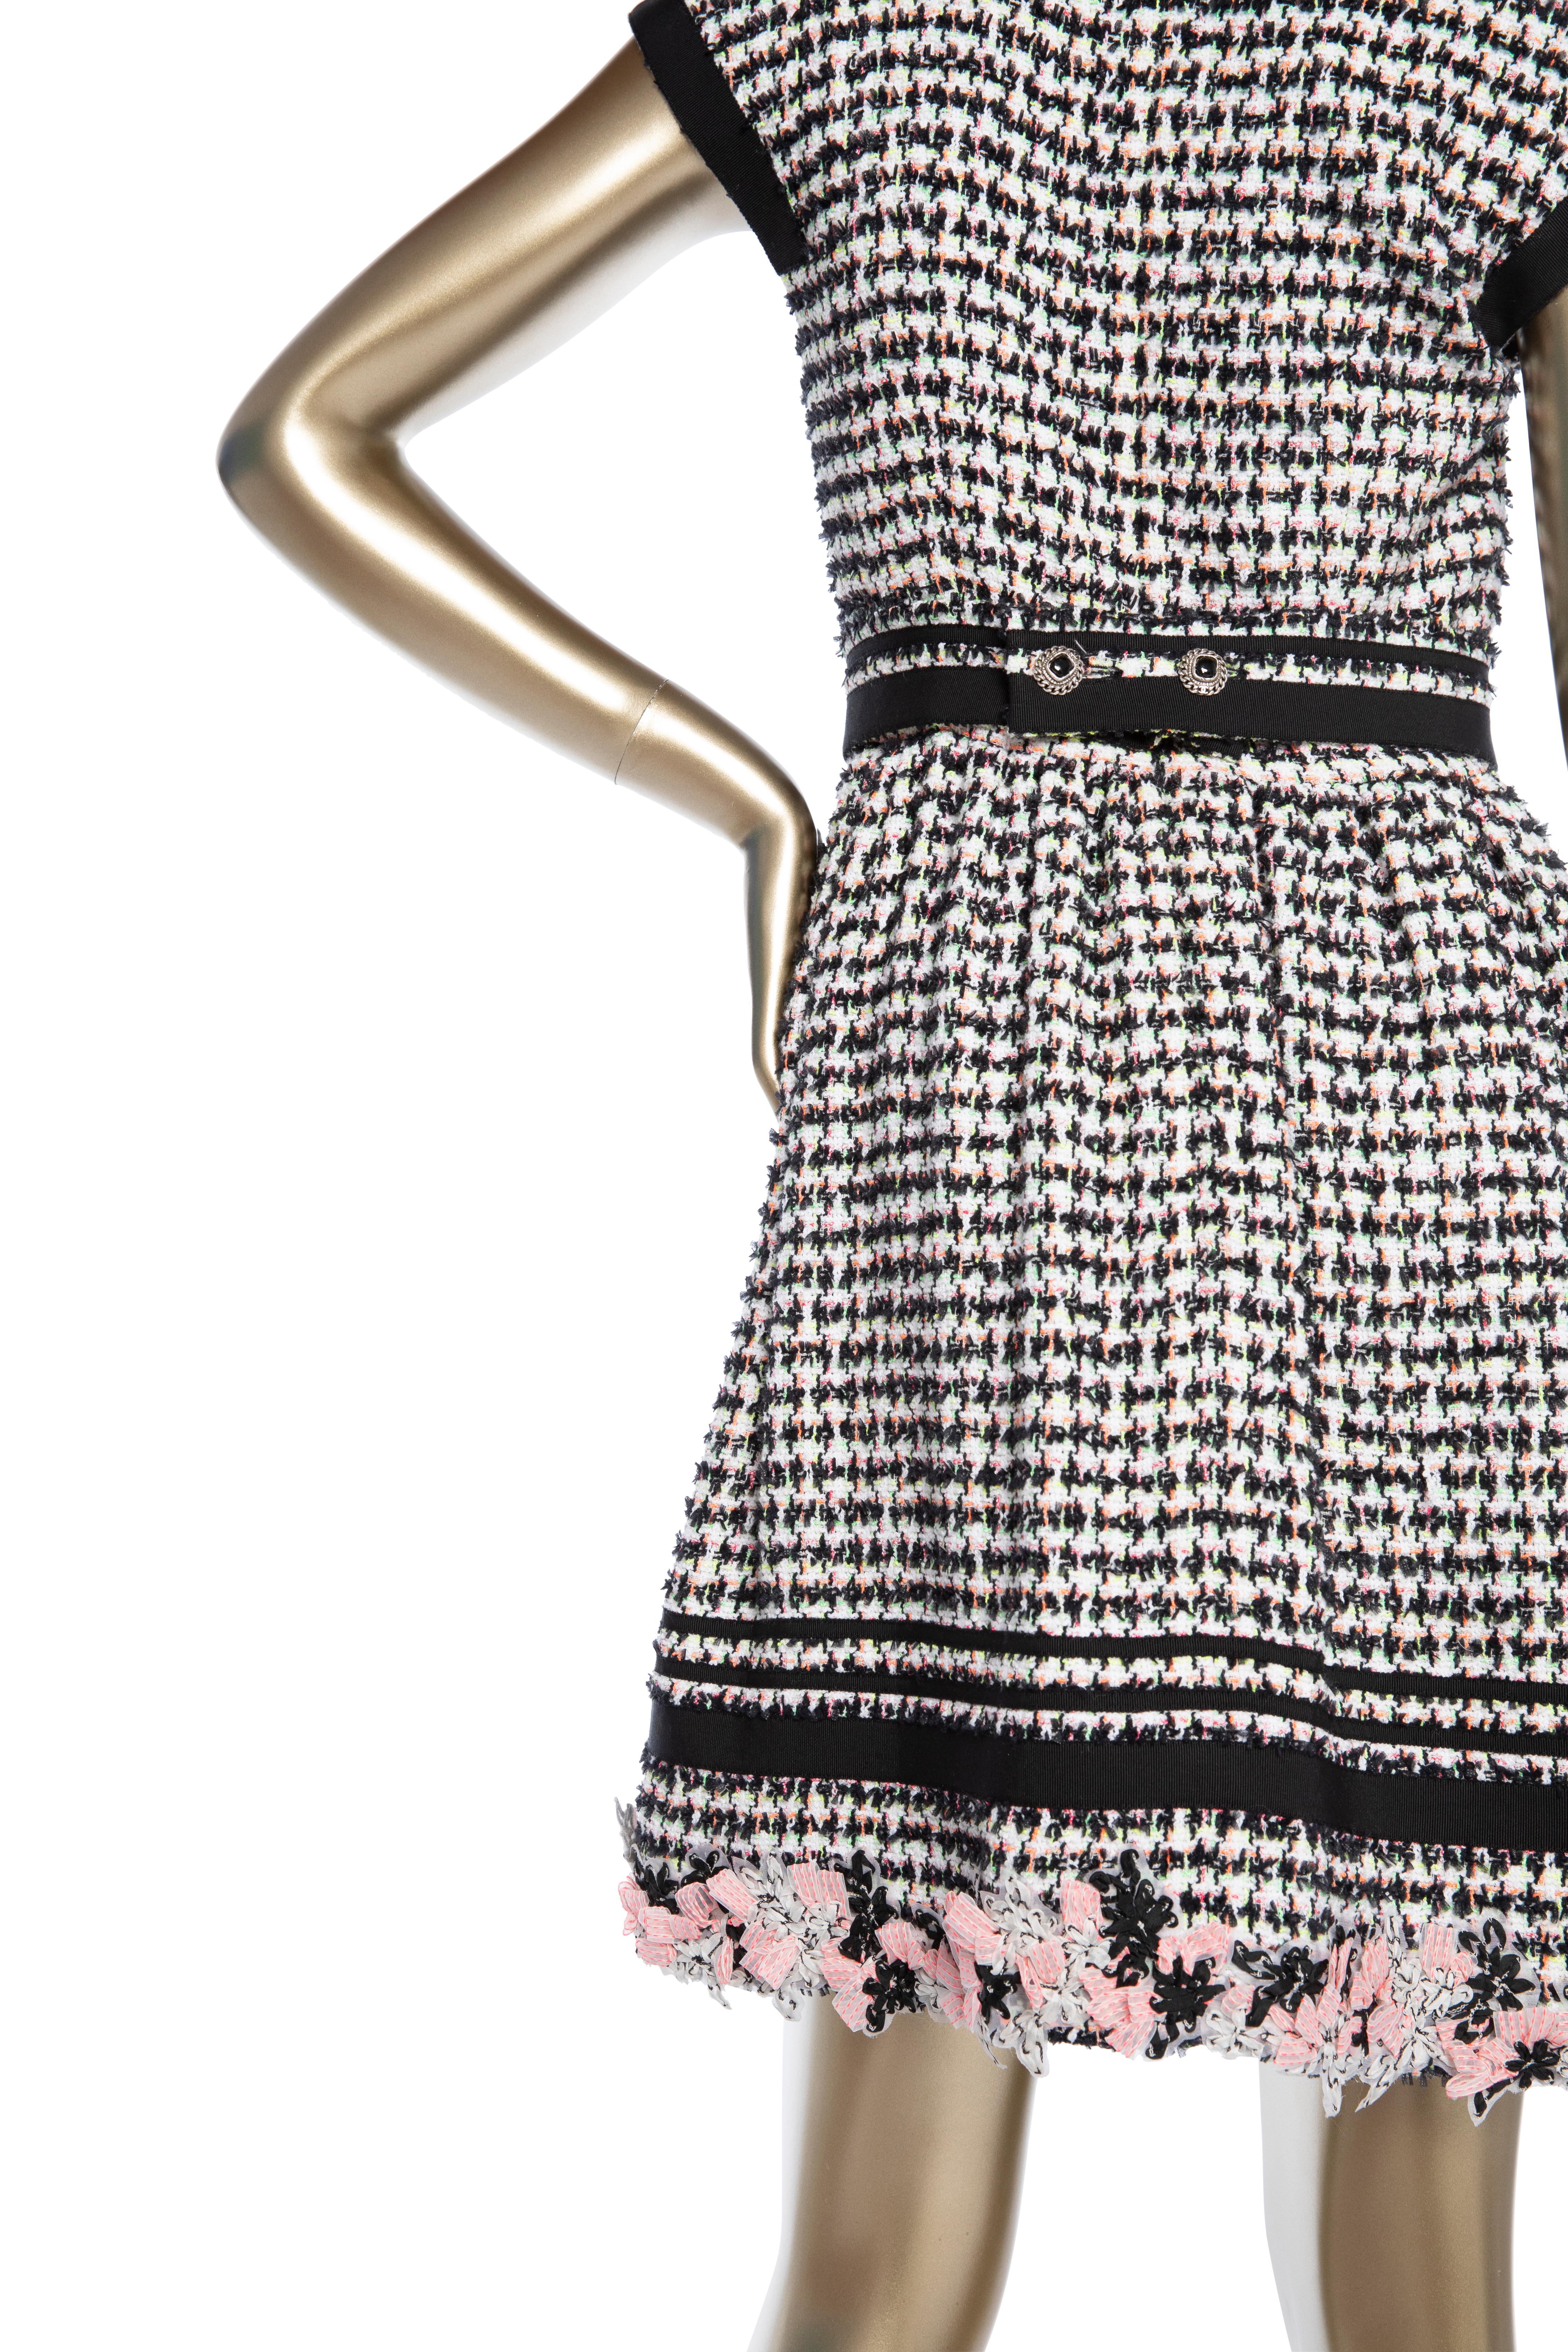 Rare Chanel Tweed Dress From 2010 Spring Collection. For Sale 6